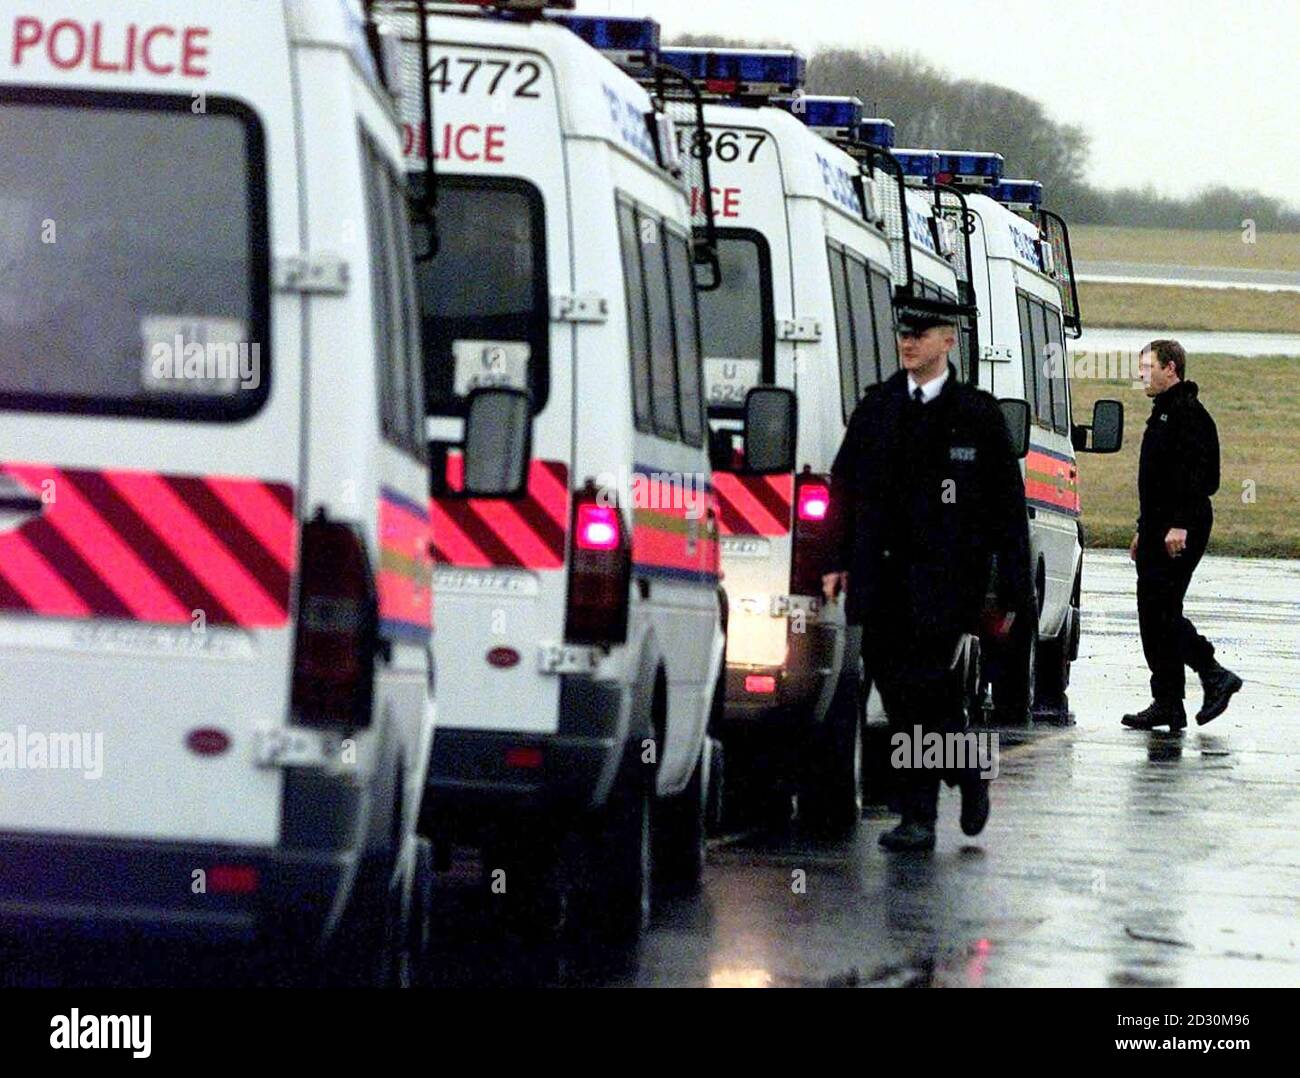 A large police presence situated at Stansted airport, on-standby as negotiations for the hijacked Ariana Airlines Boeing 727 continues, where about 150 people, including 21 children, are being held by up to 10 armed hijackers. * The hijackers seized control of the jet on an internal flight in Afghanistan. Stock Photo